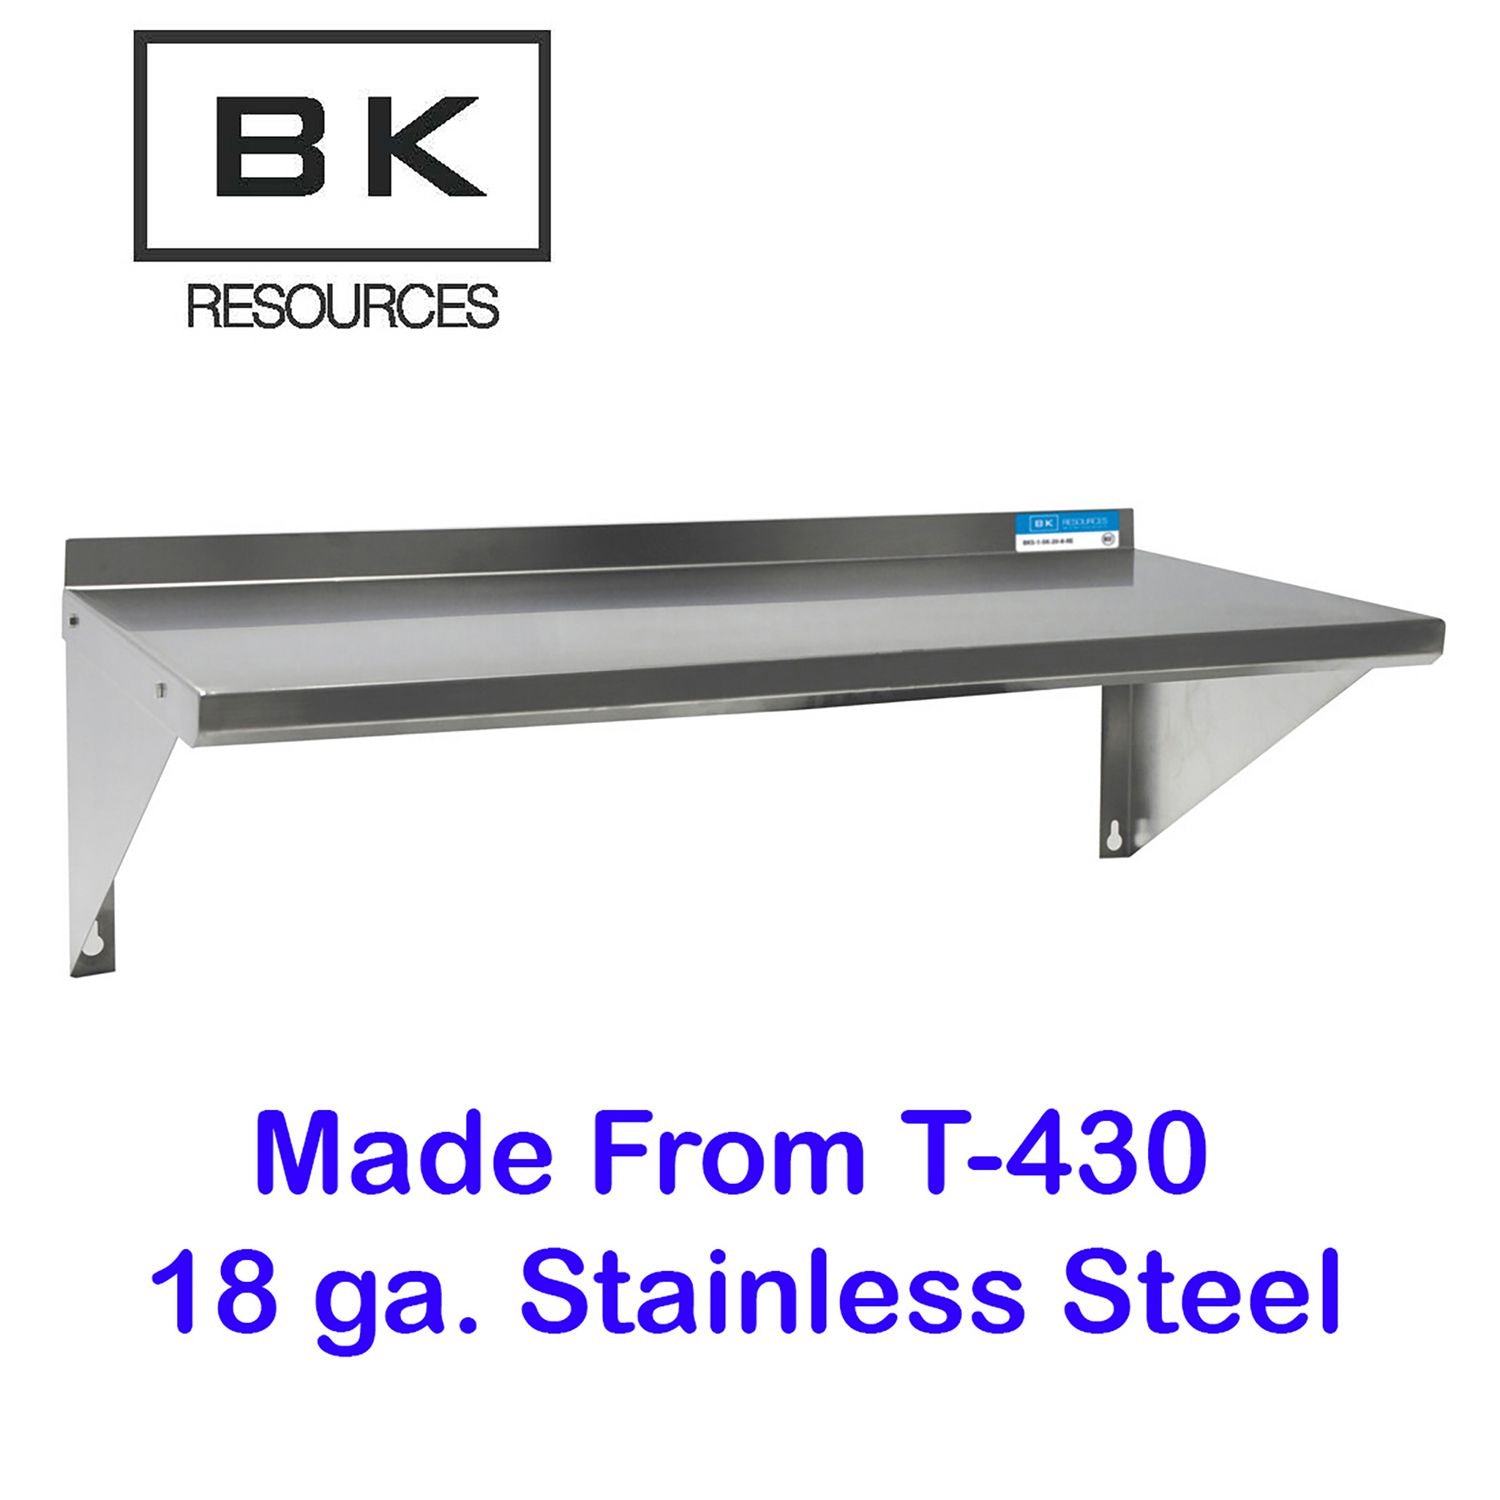 stainless-steel-economy-overshelf-48w-x-12d-x-8h-stainless-steel-silver-2-pallet-ships-in-4-6-business-days_bke2wse1248 - 3